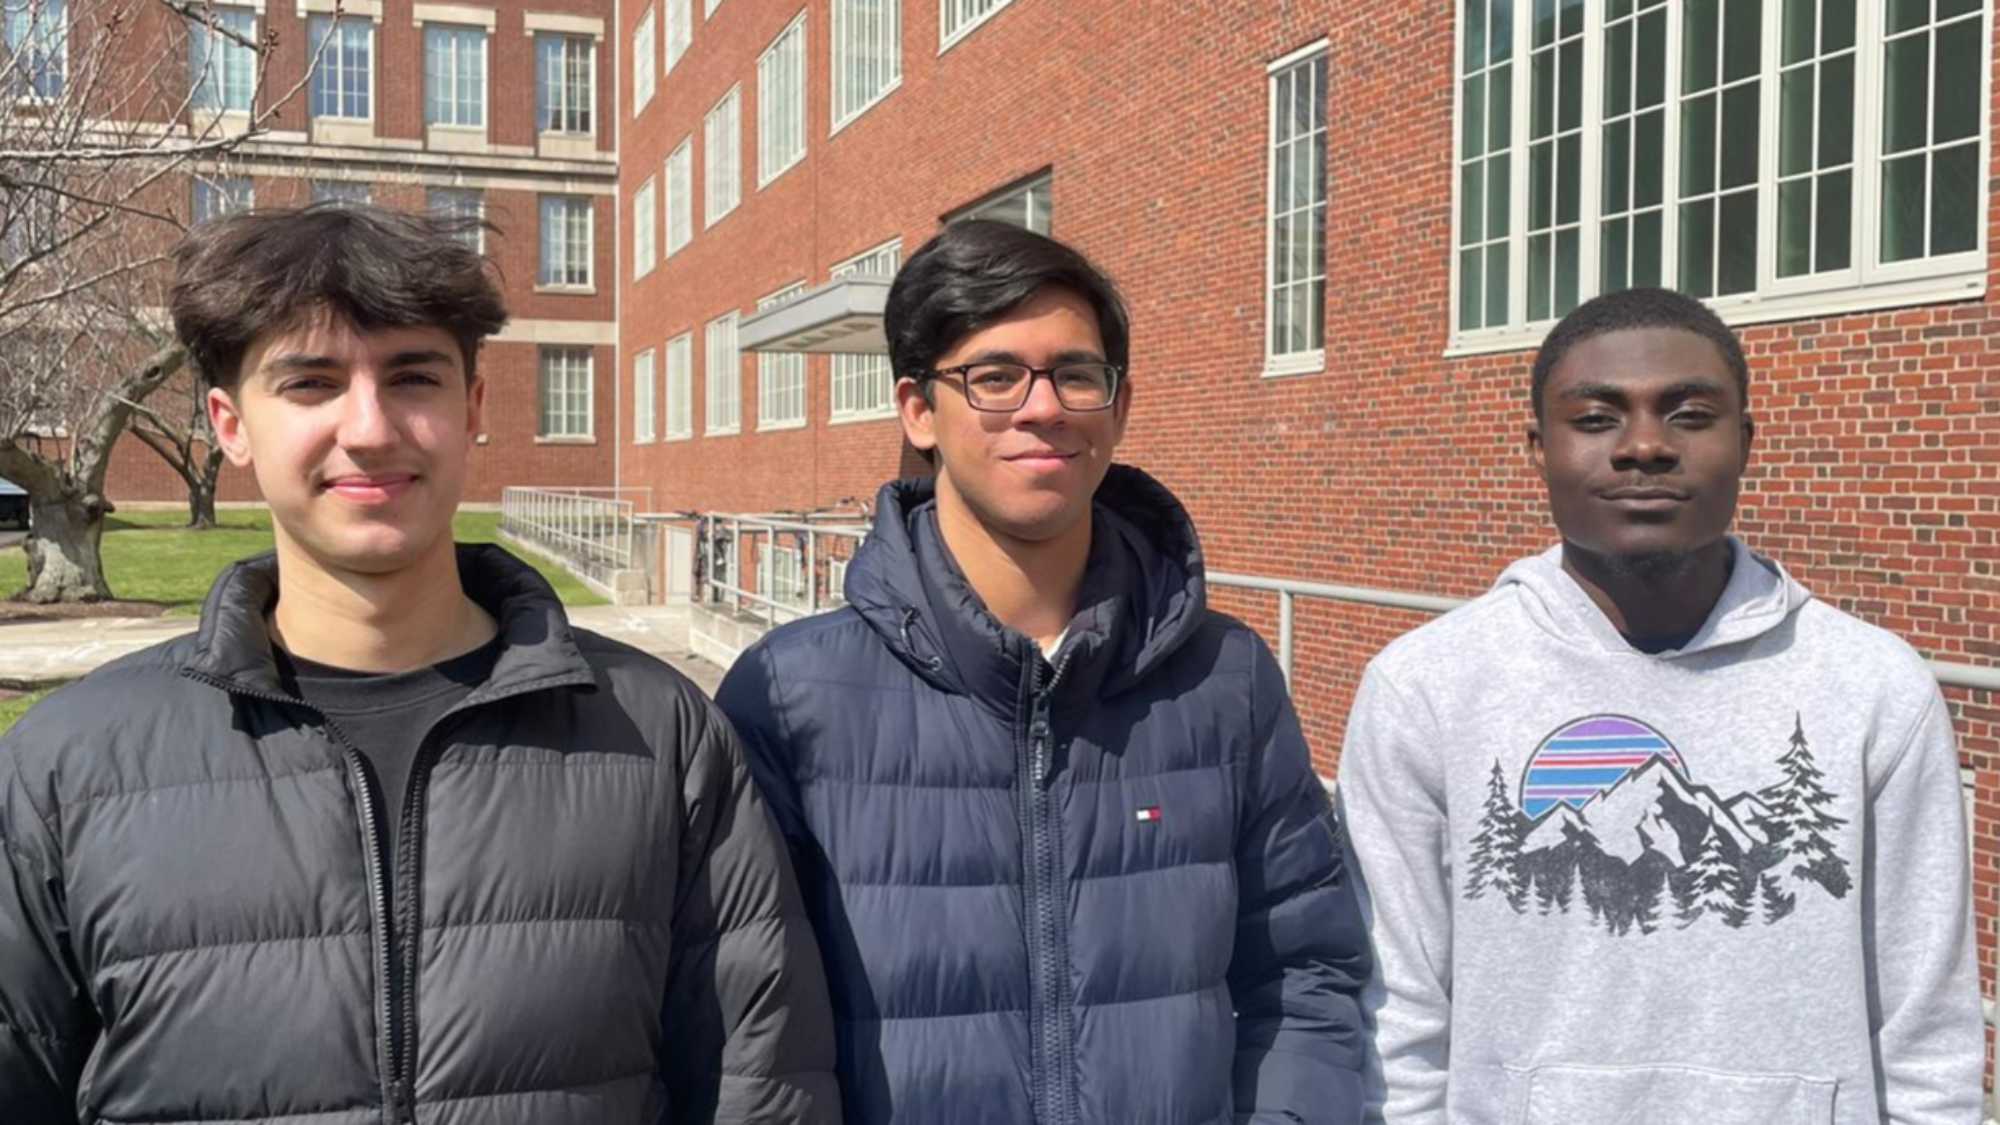 Three students in winter jackets and gear stand for a group photo on the River Campus.